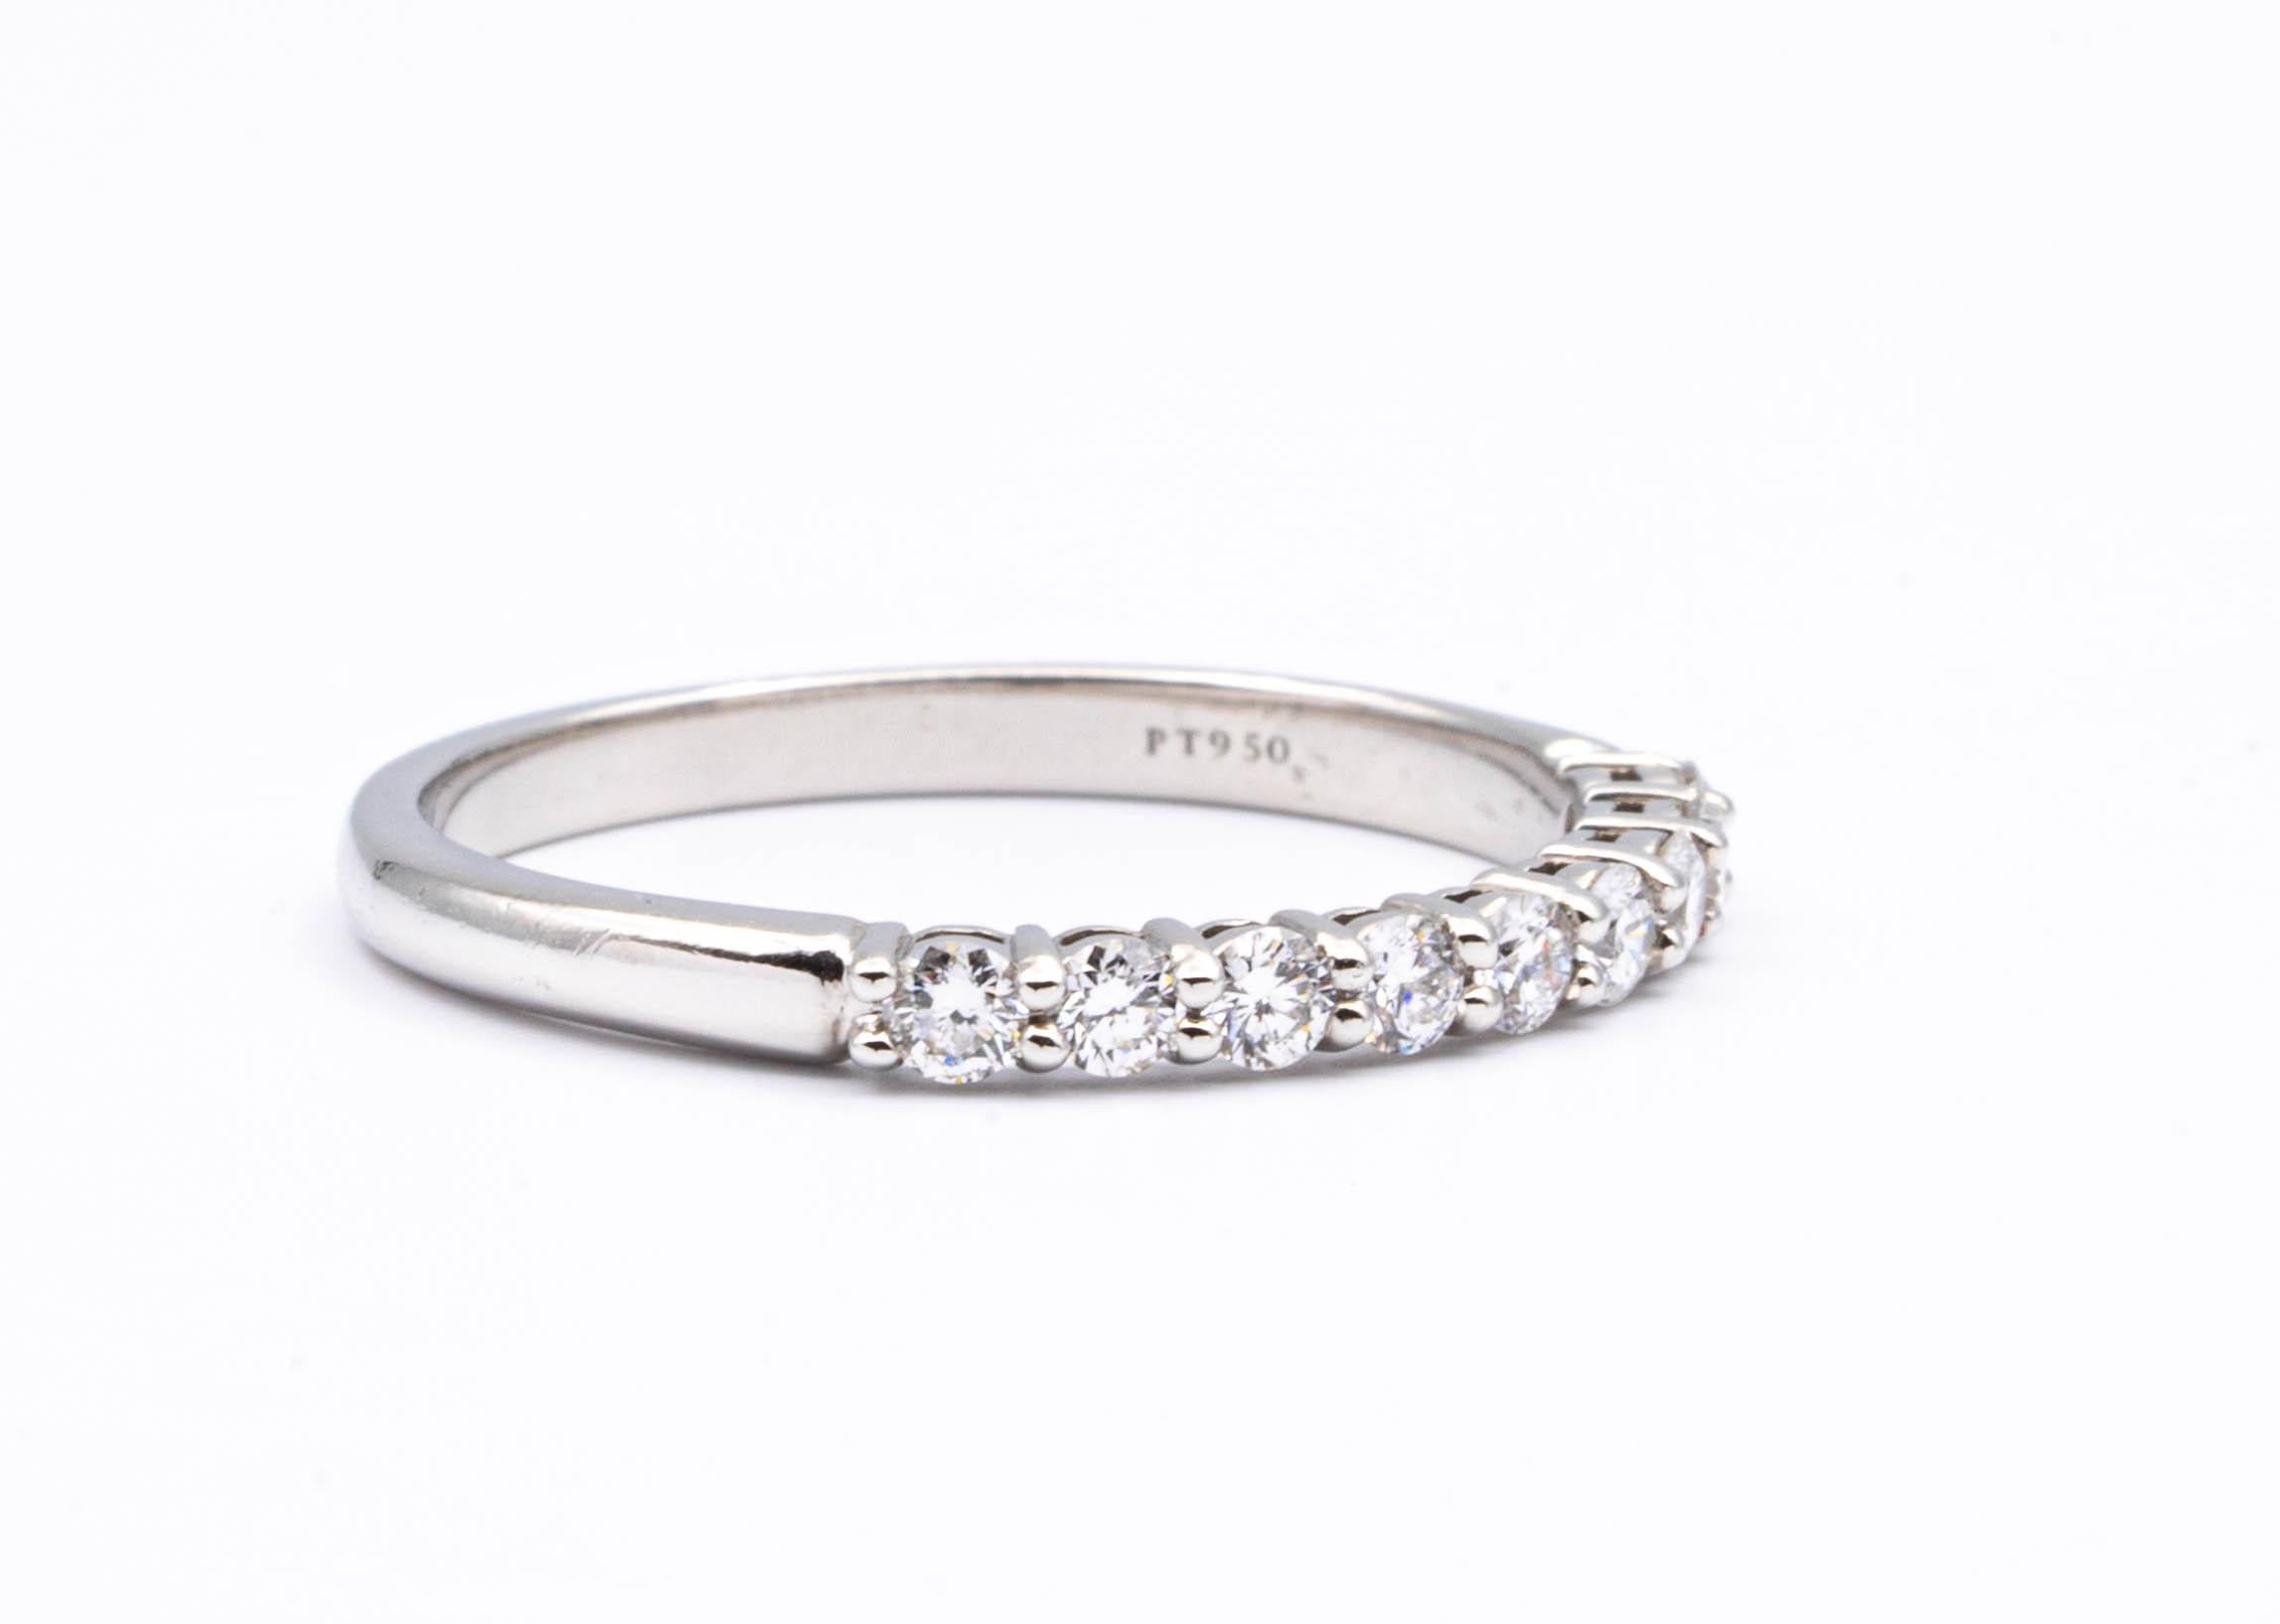 Tiffany & Co. Embrace Half Band ring finely crafted in platinum with 9 Round Brilliant cut diamonds weighing .27 carats total weight. 

Stamp: Tiffany & Co. PT950
Size: 6.5 ( can be re-sized)
Includes Tiffany outer Box and inner box
Retail :